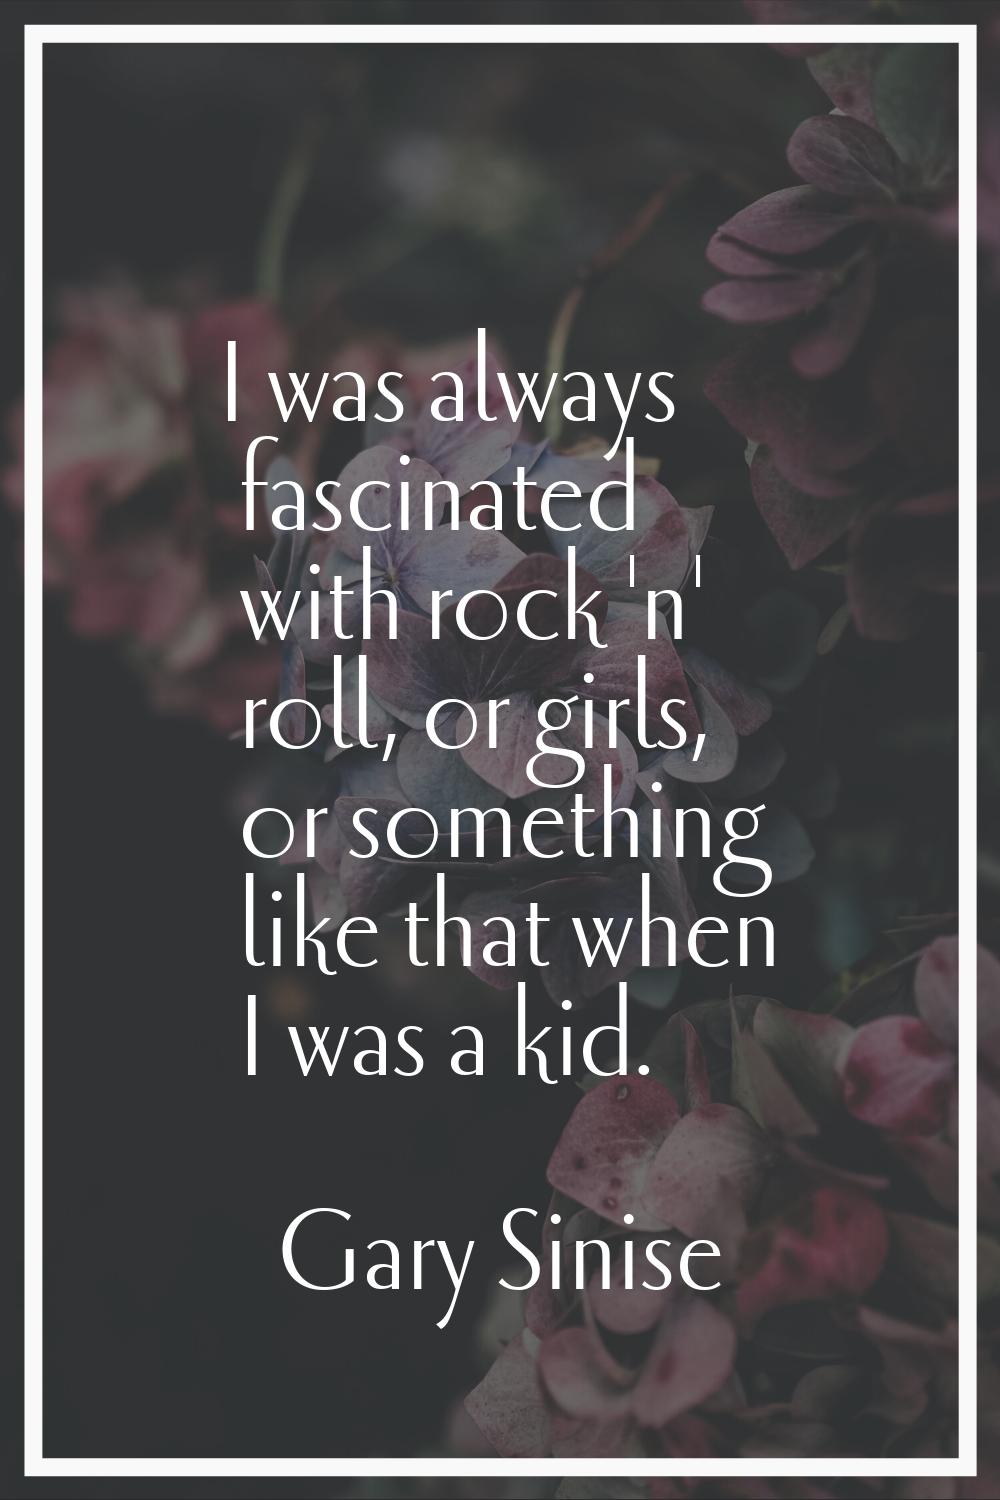 I was always fascinated with rock 'n' roll, or girls, or something like that when I was a kid.